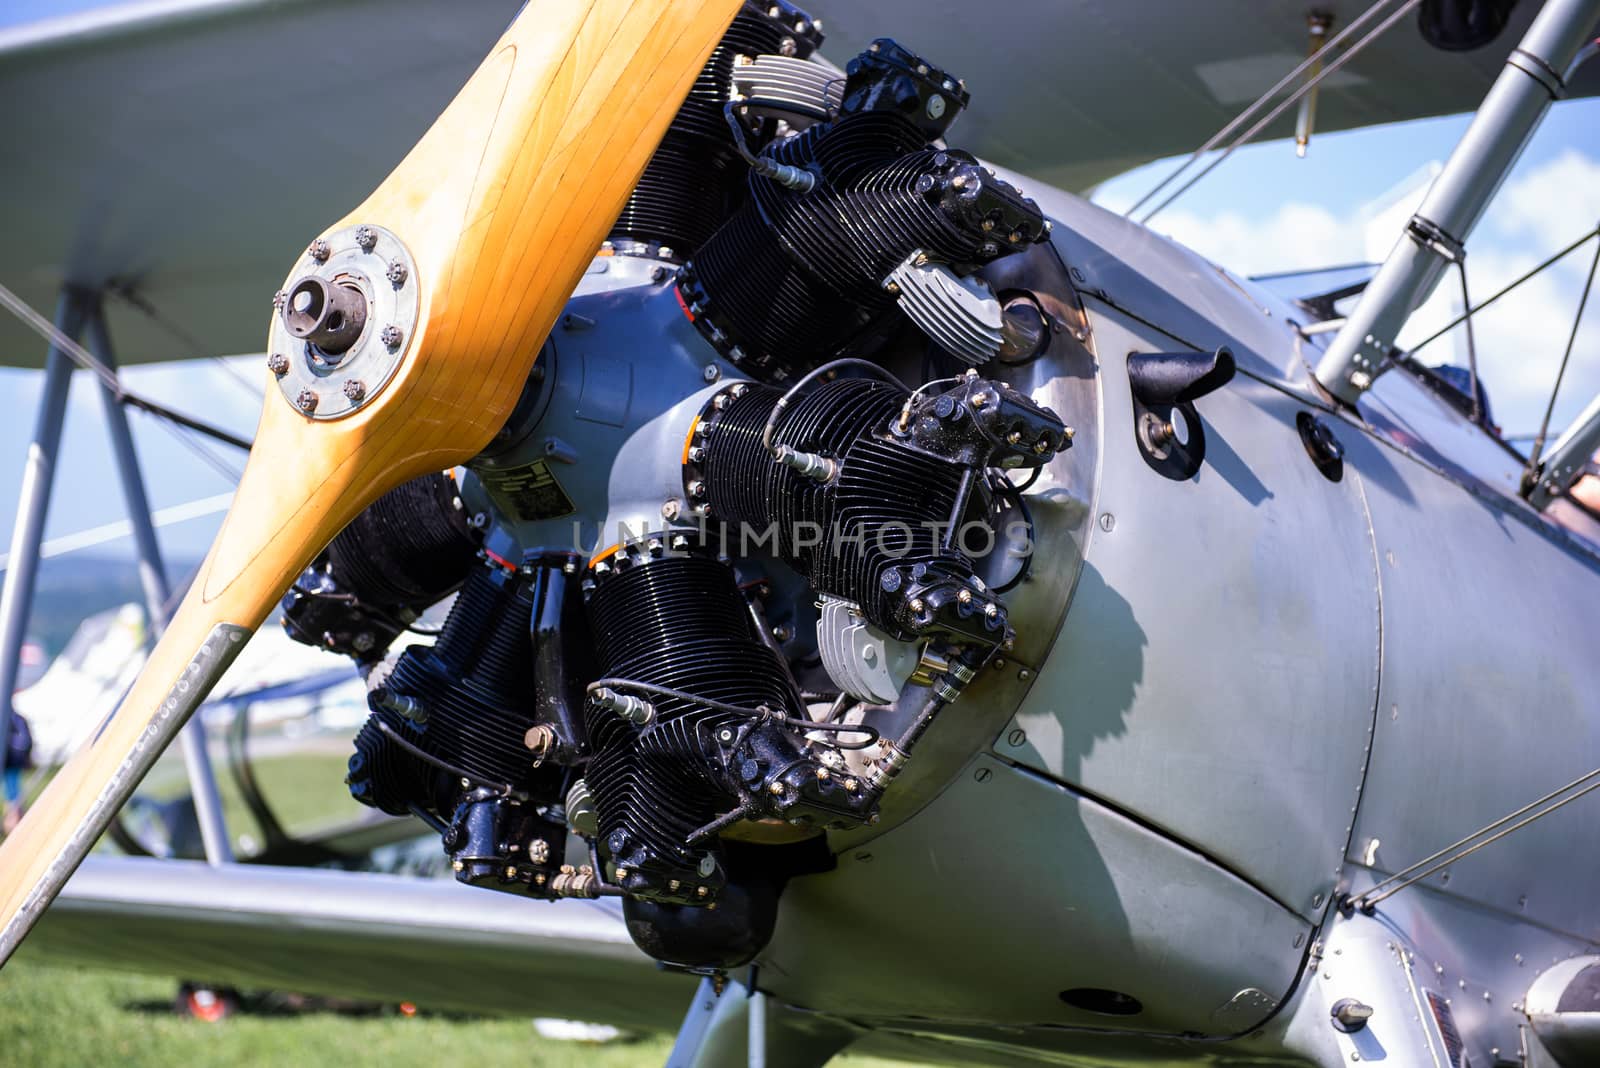 Vintage aircraft with radial engine and wooden propeller, close up of nose section, selective focus on engine